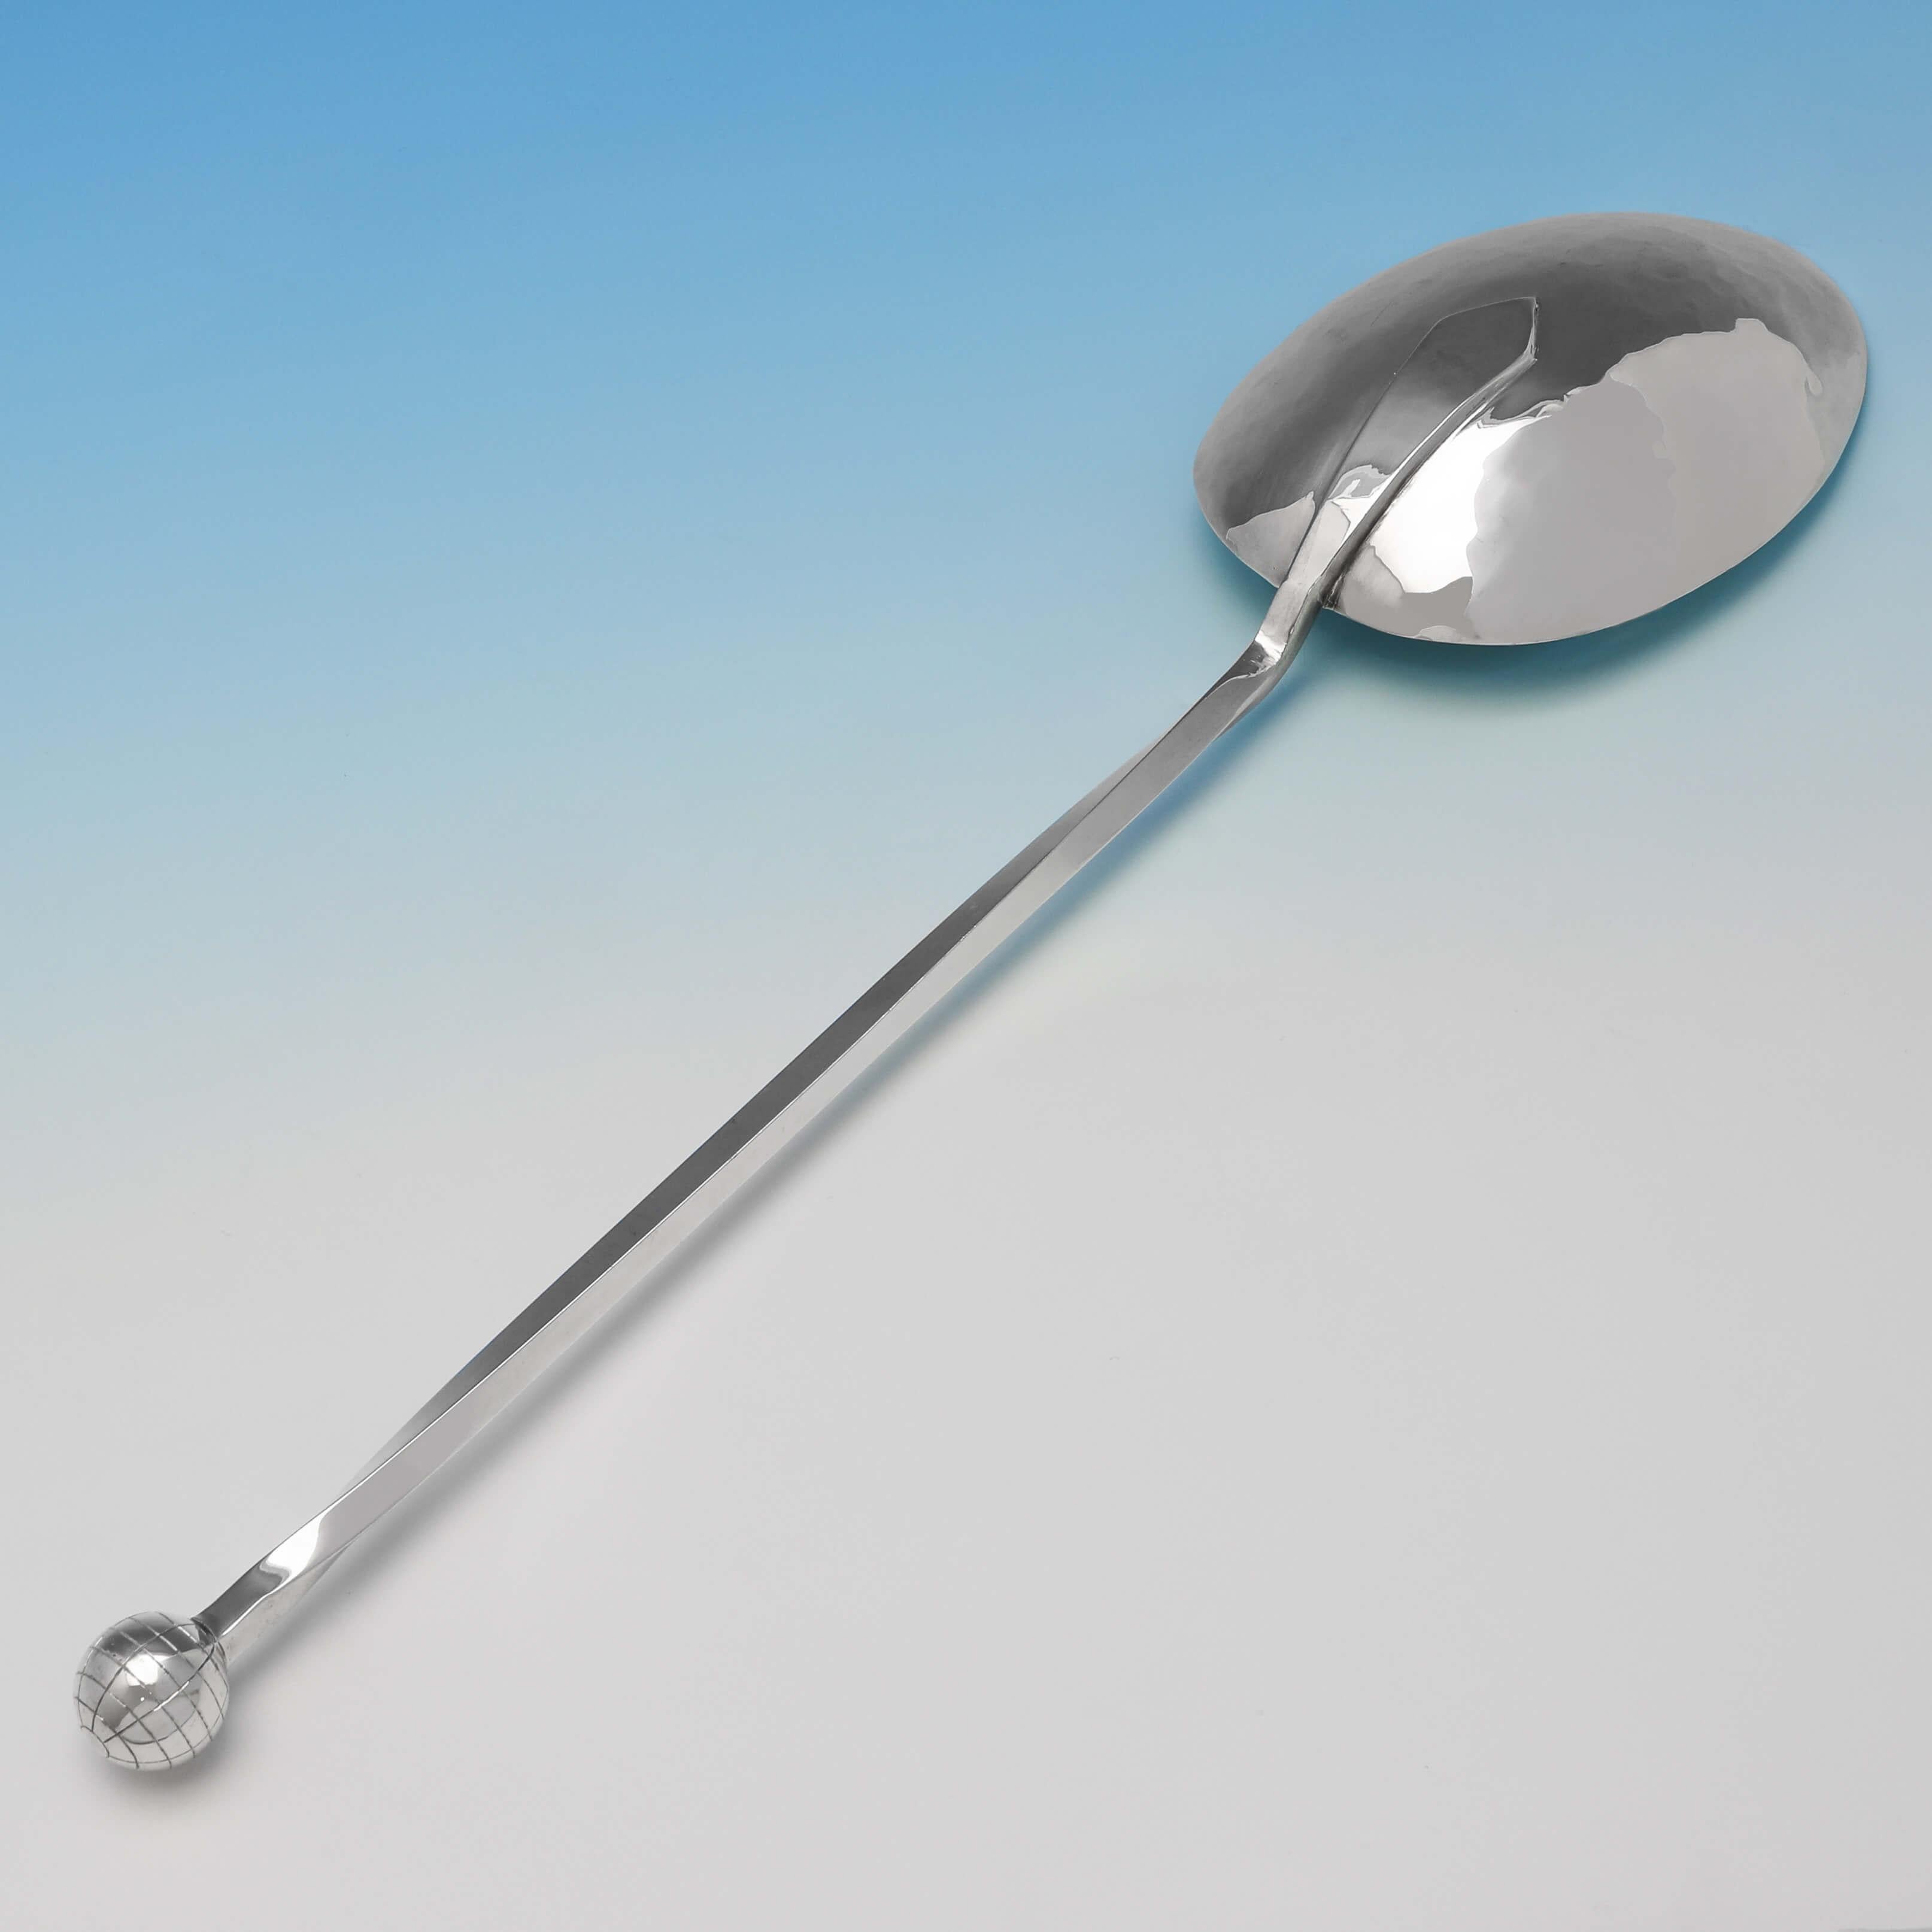 Hallmarked in London in 2000 by Ramsden & Roed, this striking and large, sterling silver basting spoon, is modernist in design, and features a hammer finish to the bowl, a twisted handle and a globe finial. The basting spoon measures 14.5